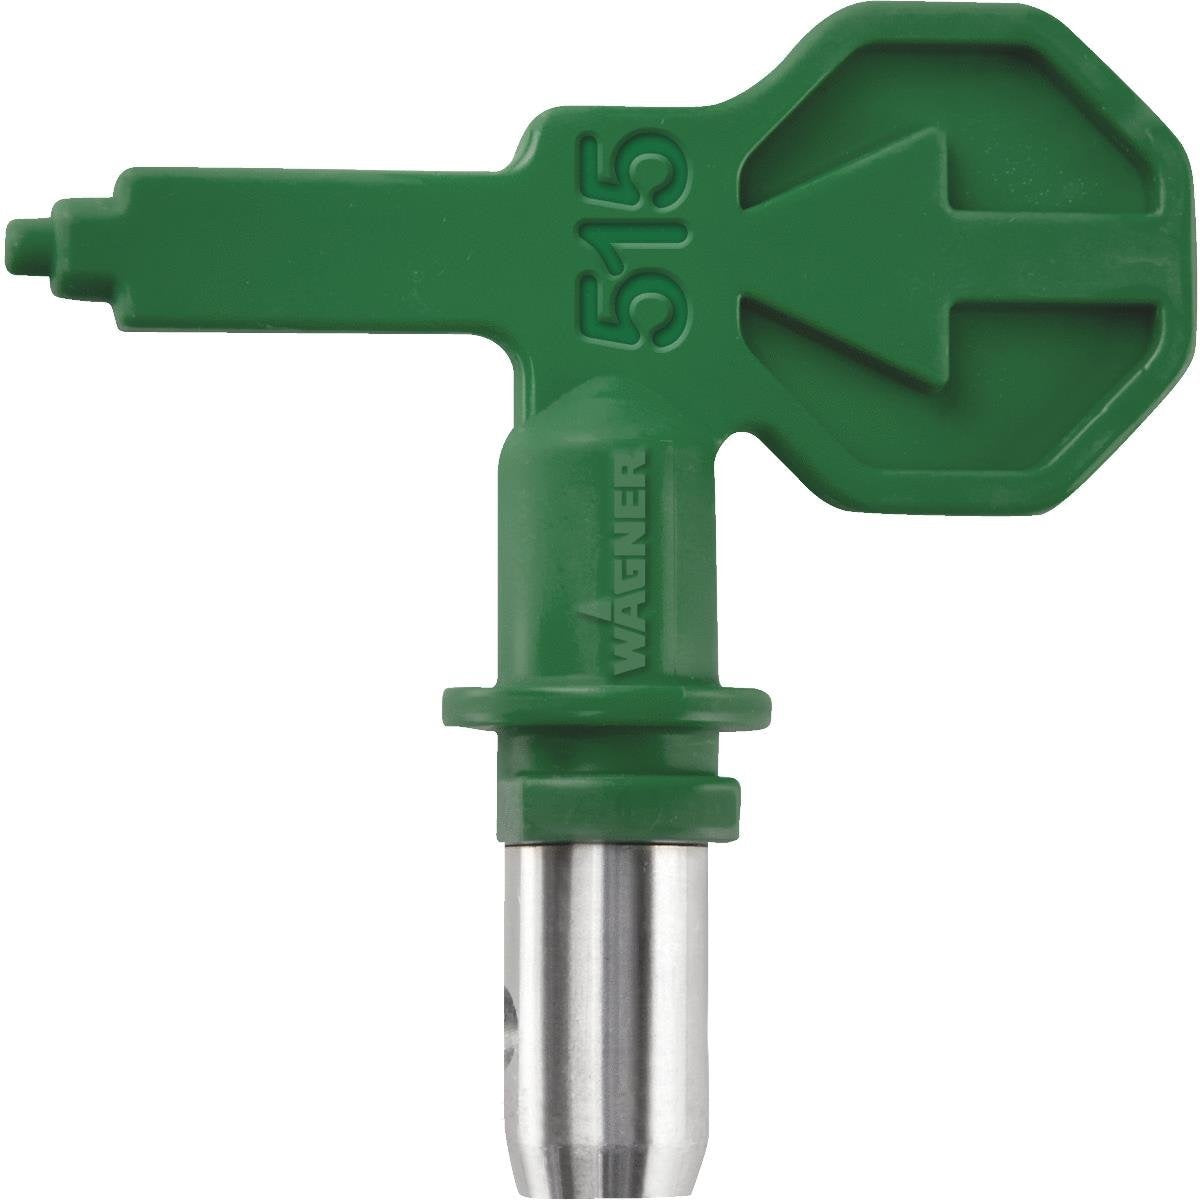 Wagner 0580606 Control Pro 515 Airless Spray Tip, 1600 psi